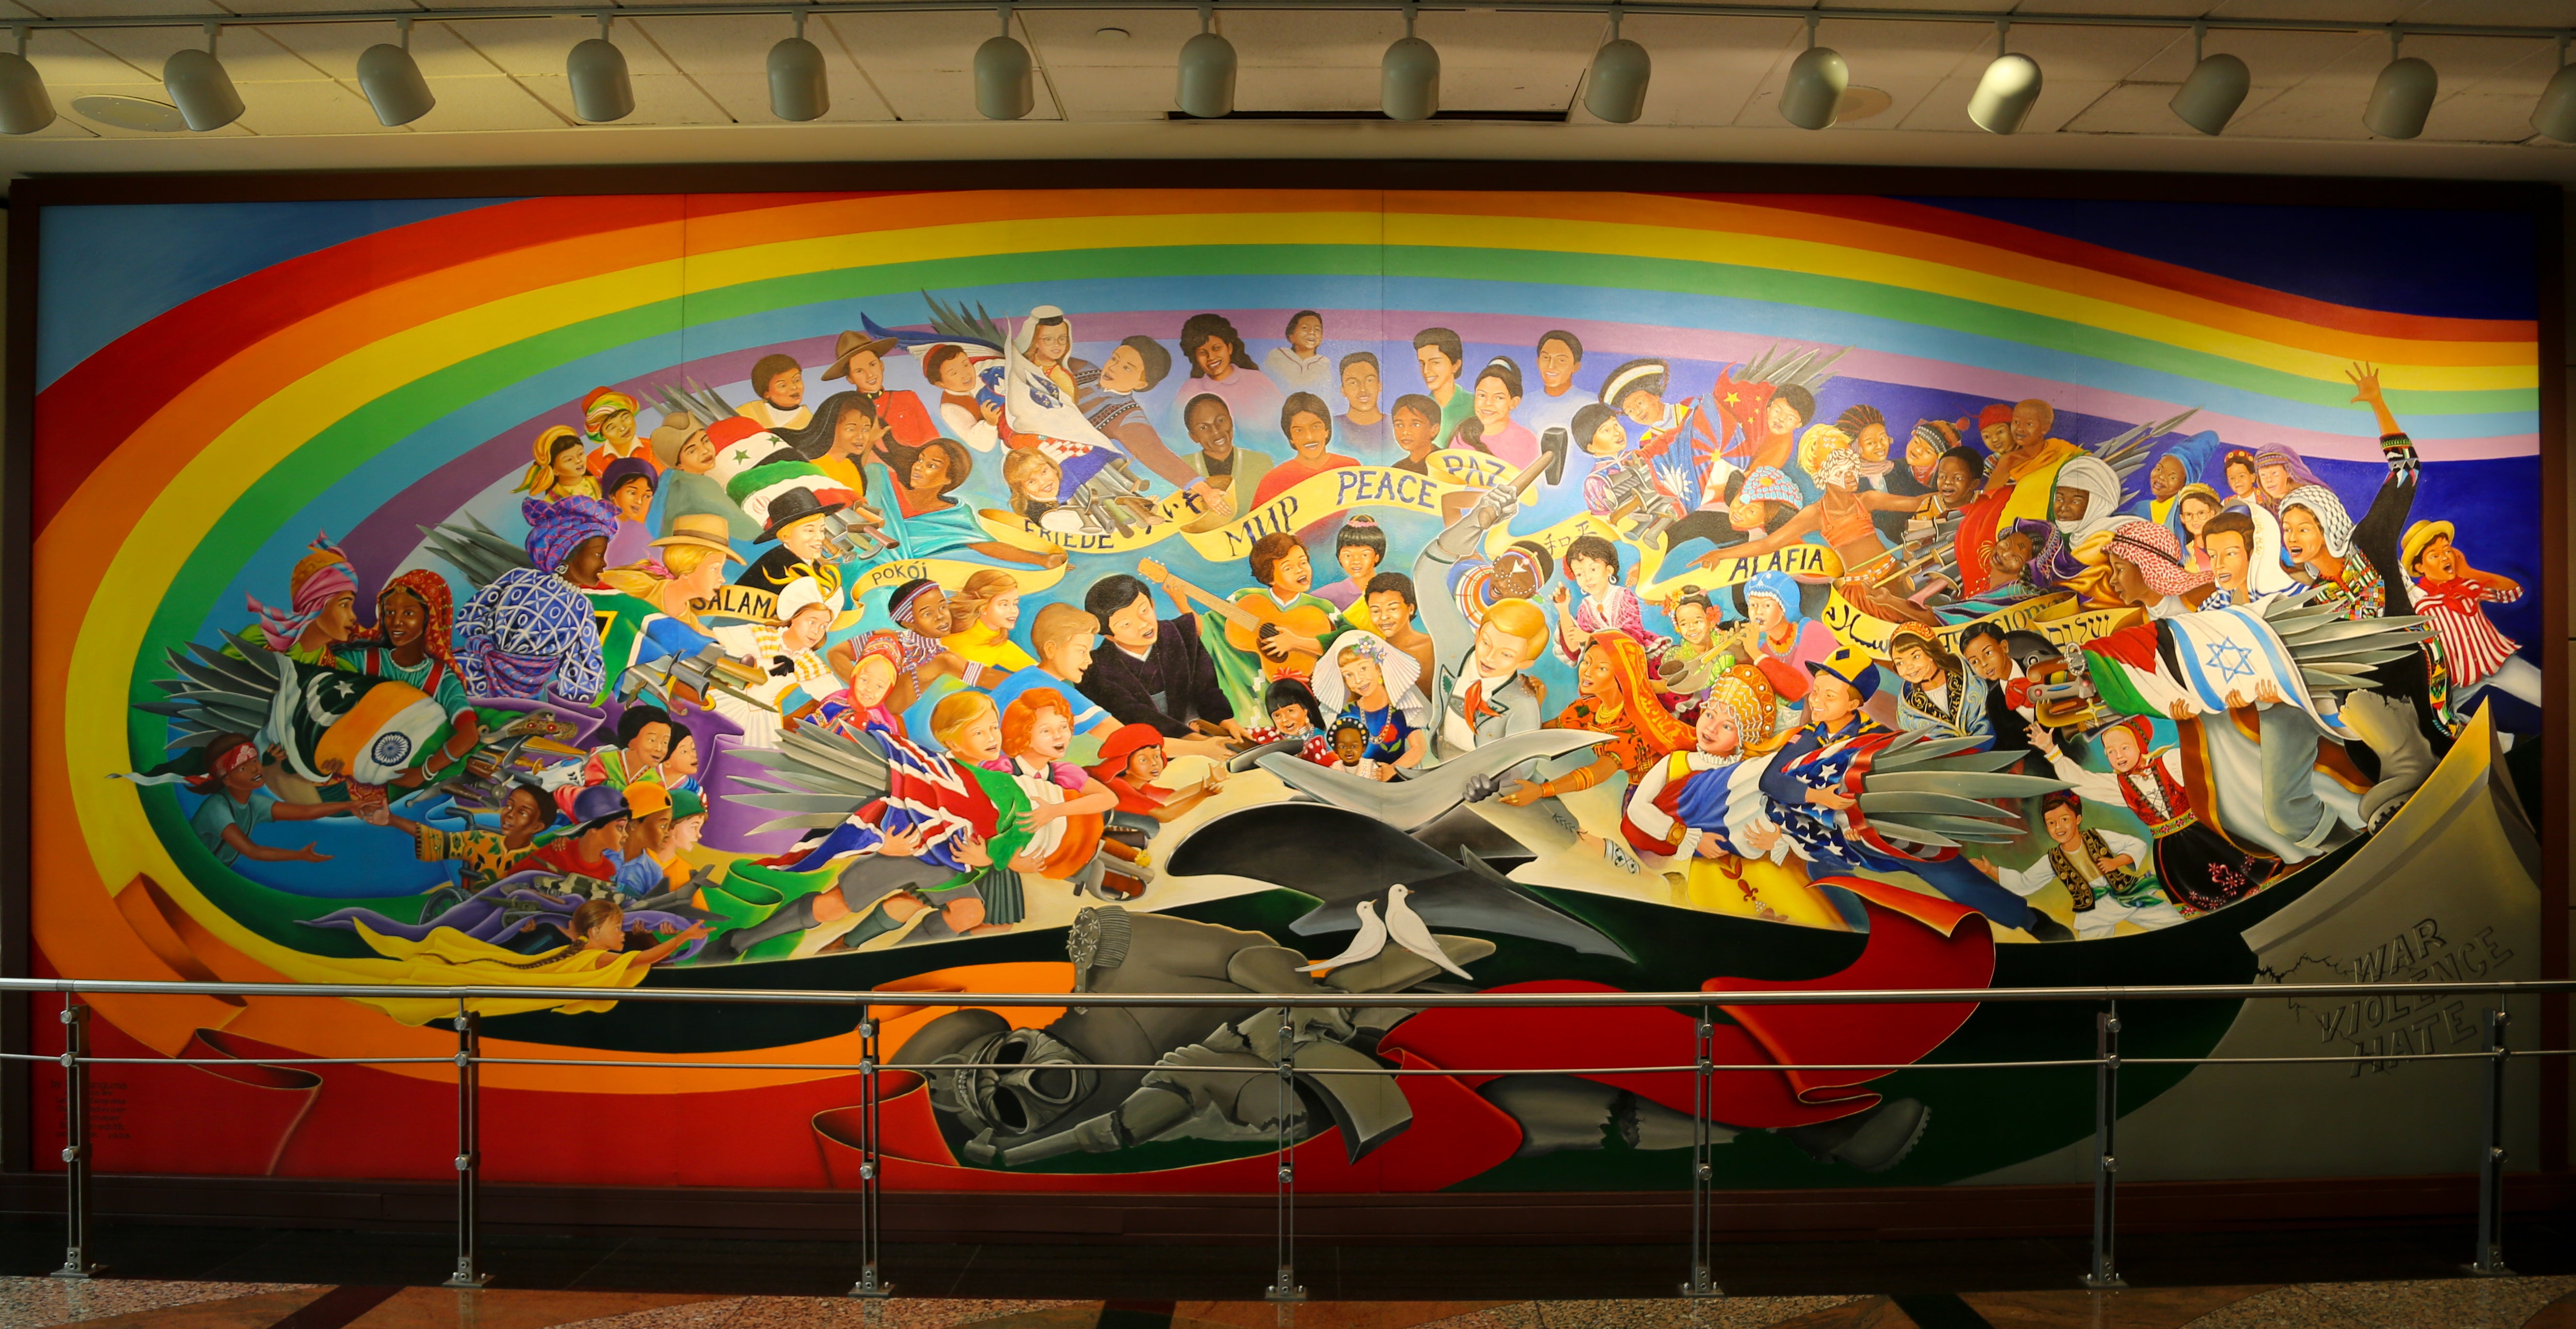 The murals in this collection are intended to represent the future. (Image: Denver International Airport)